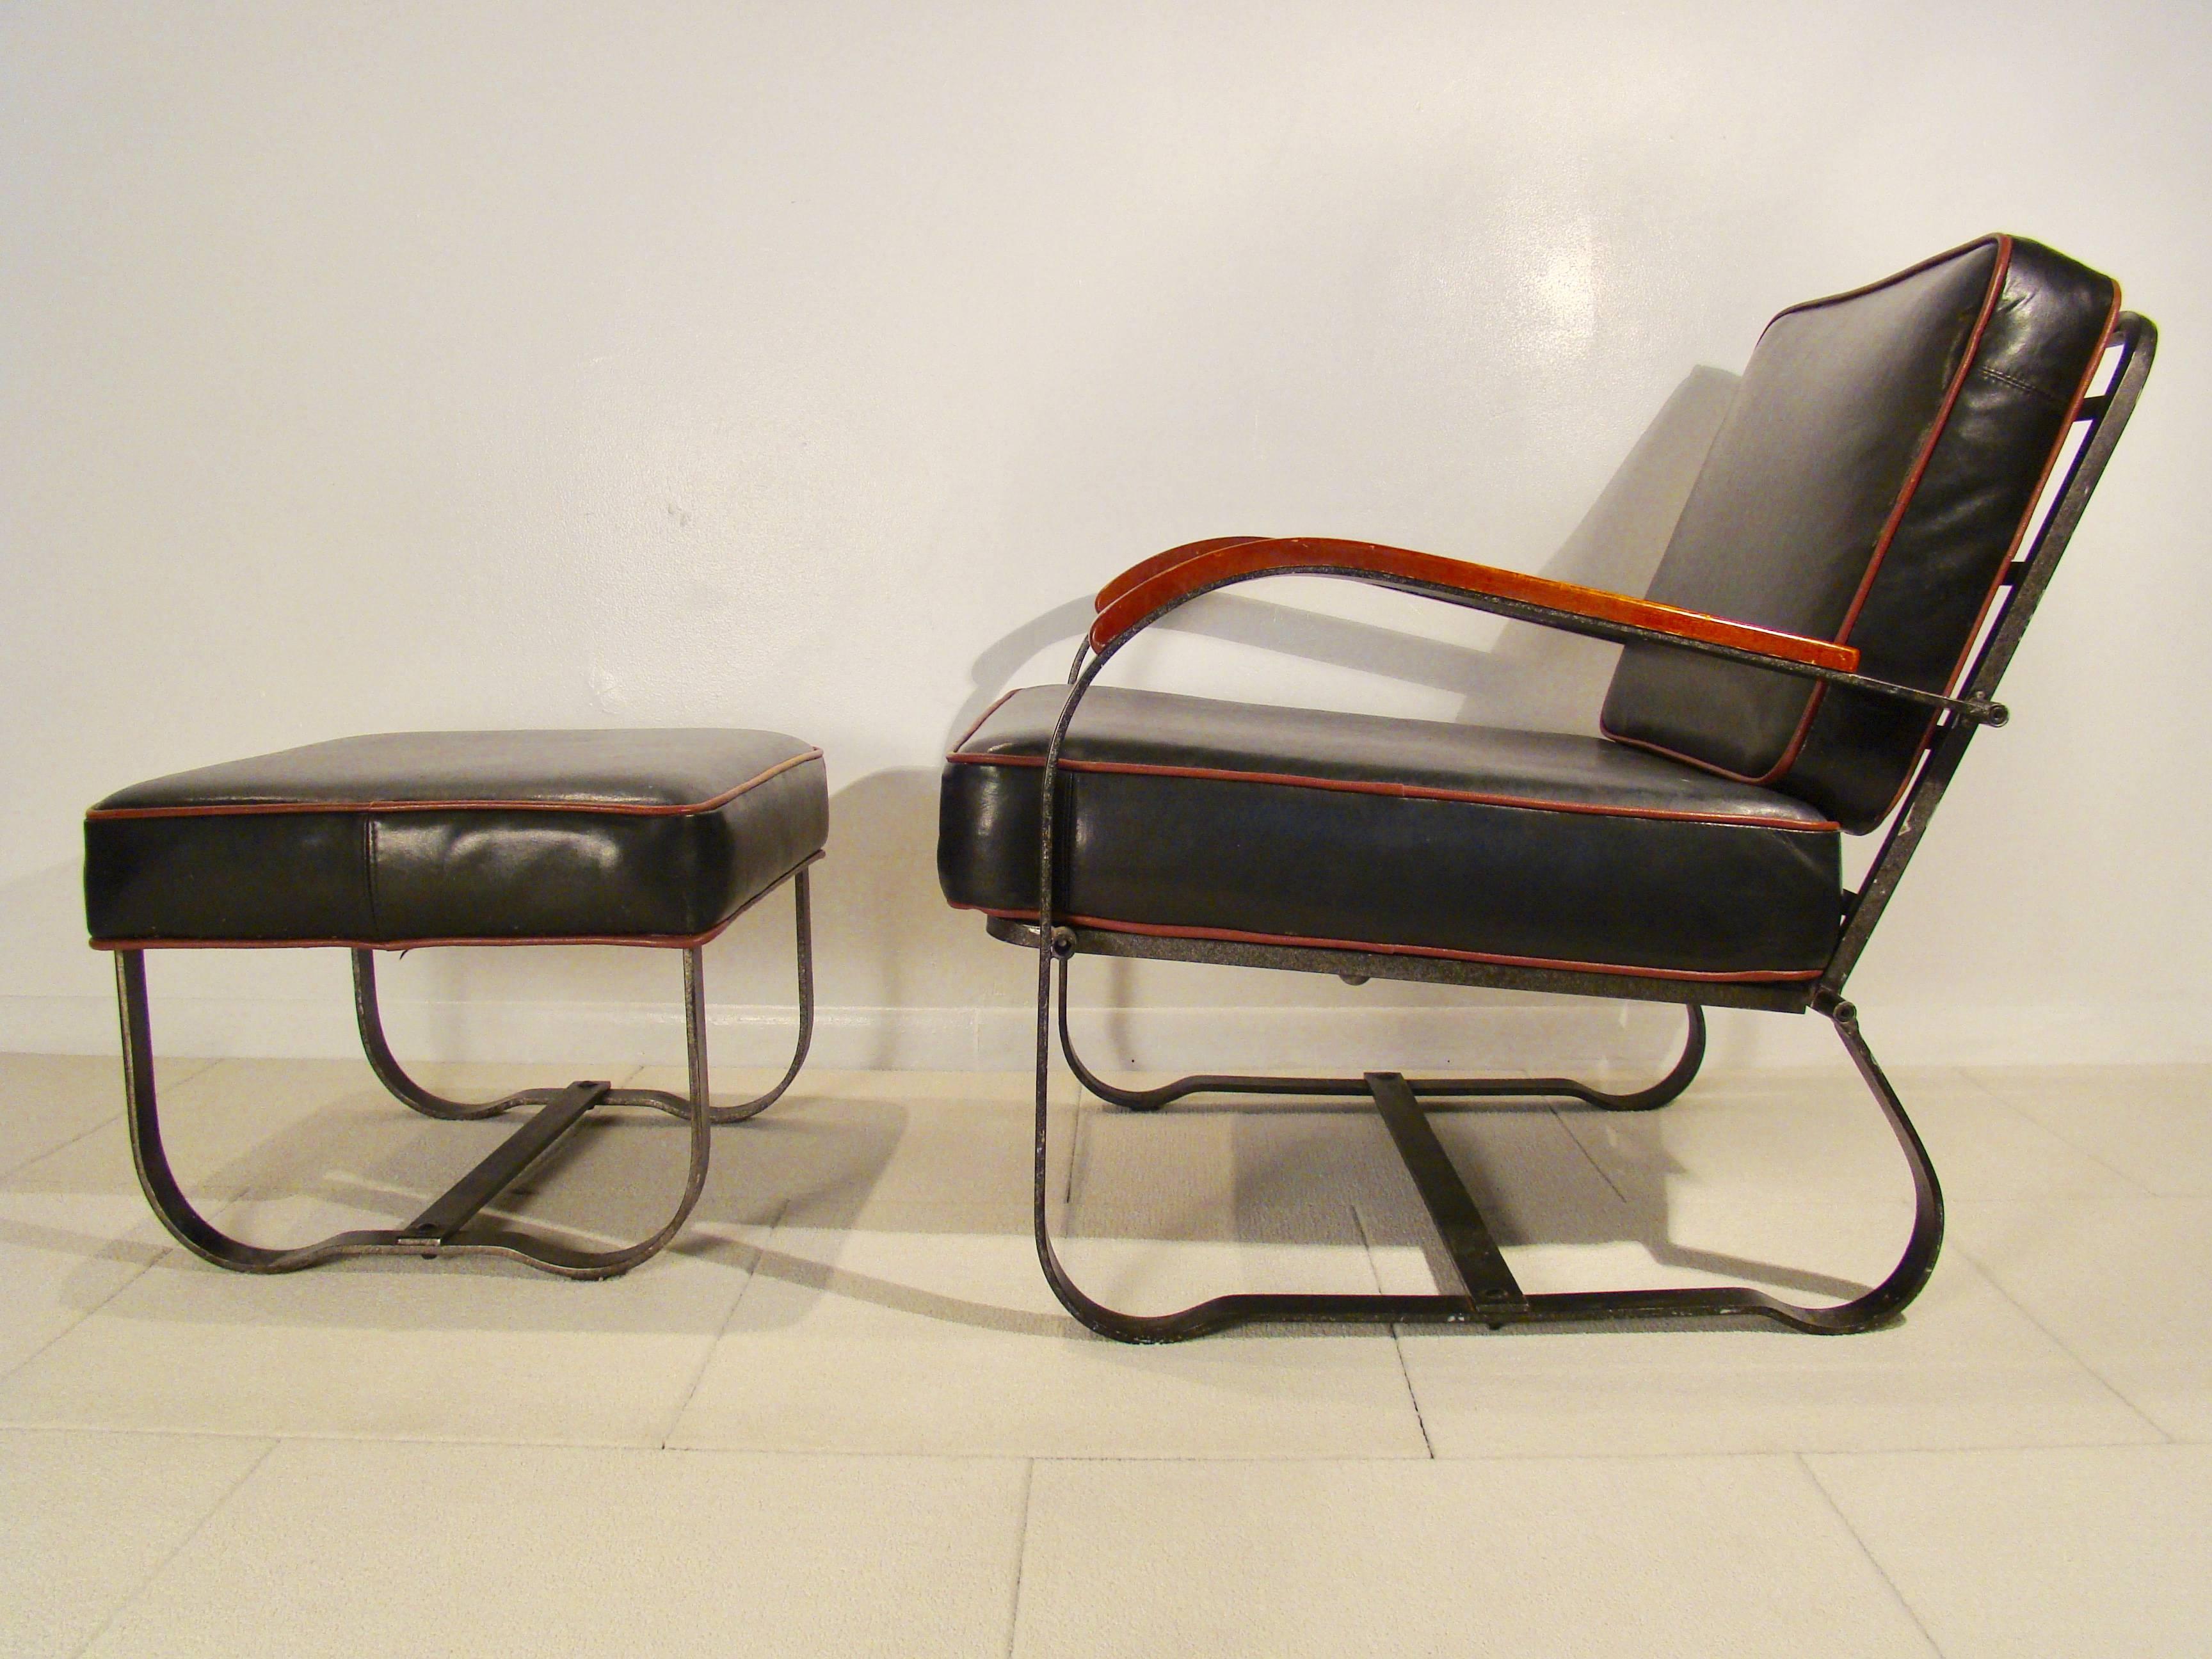 Stunning and rare Art Deco machine age lounge chair and ottoman by McKay. Looks to be all original and built like a tank. From every angle, it is gorgeous and the depth of the chair makes it that much more comfortable and charming. McKay Furniture